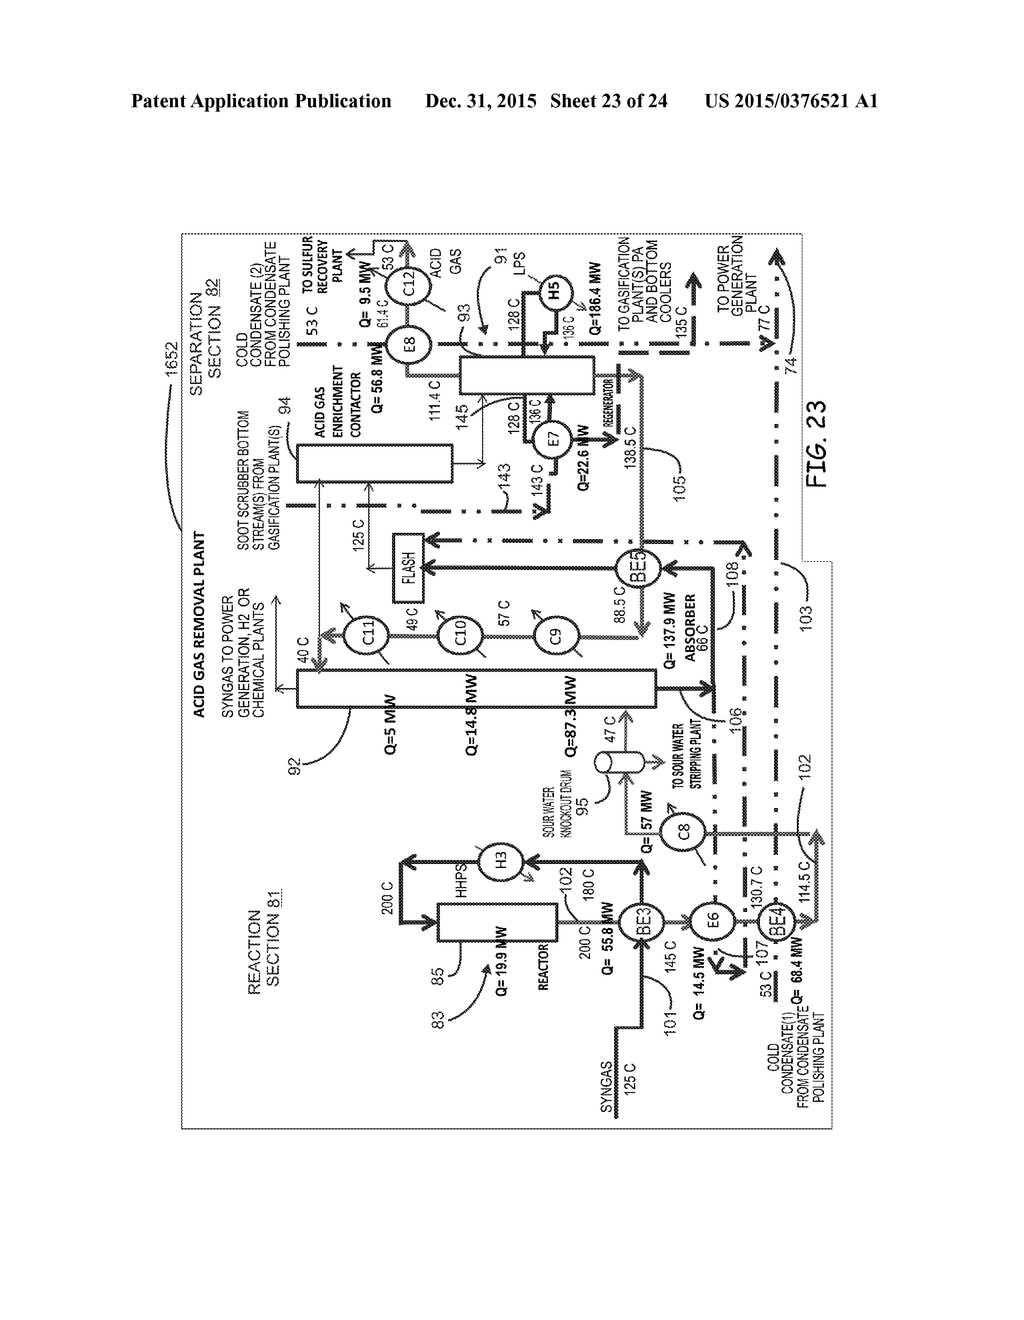 ENERGY EFFICIENT GASIFICATION-BASED MULTI GENERATION APPARATUS EMPLOYING     ENERGY EFFICIENT ACID GAS REMOVAL PLANT-DIRECTED PROCESS SCHEMES AND     RELATED METHODS - diagram, schematic, and image 24